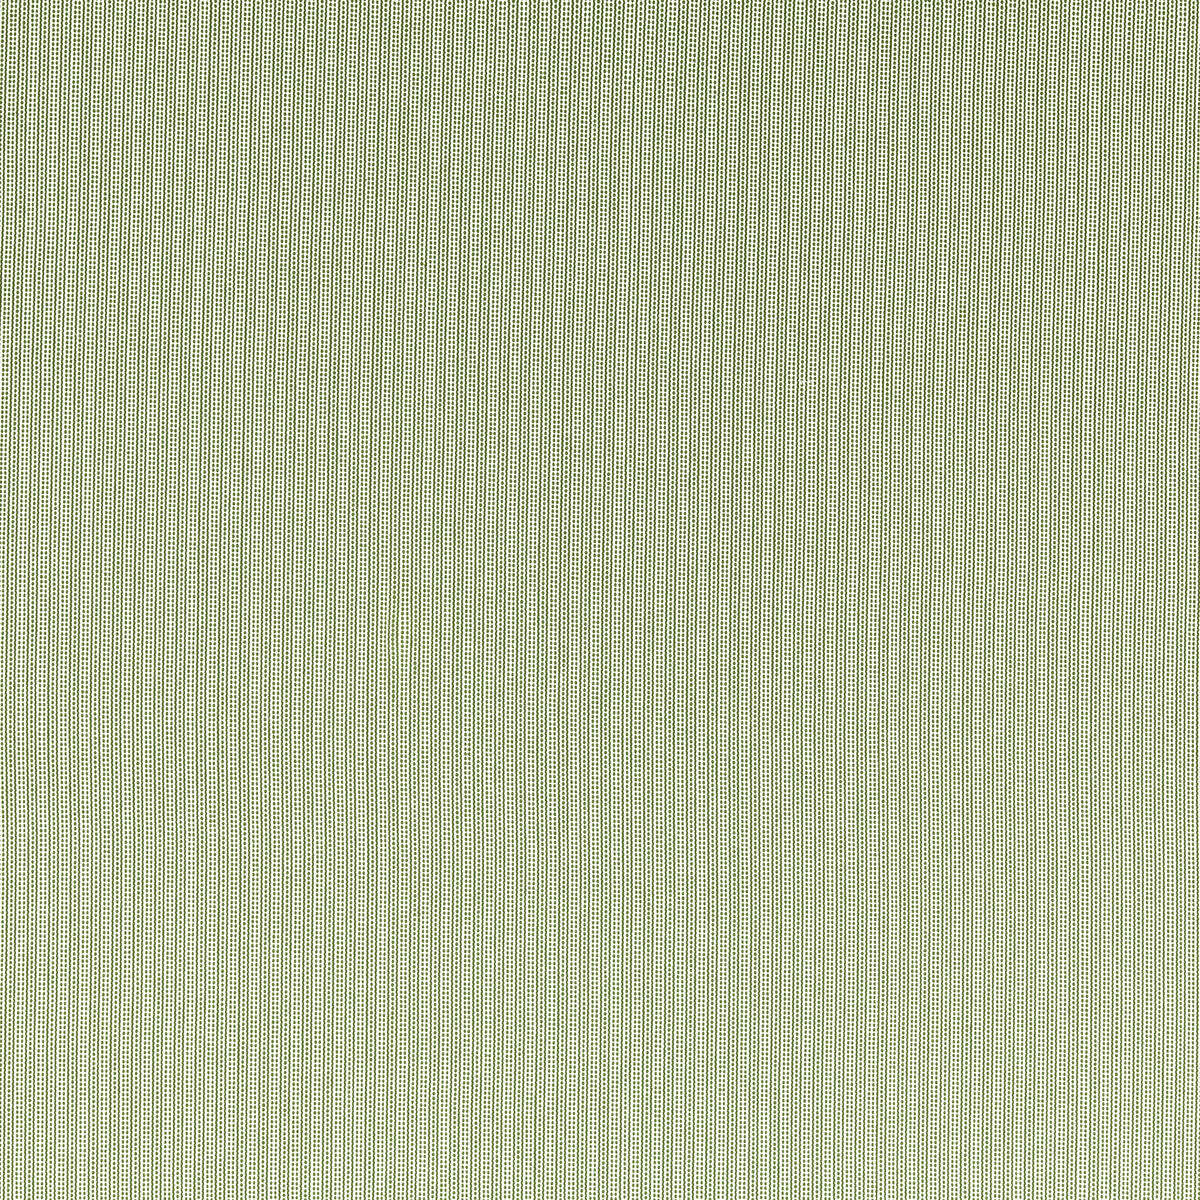 Spencer fabric in sage color - pattern F1504/05.CAC.0 - by Clarke And Clarke in the Clarke &amp; Clarke Edgeworth collection